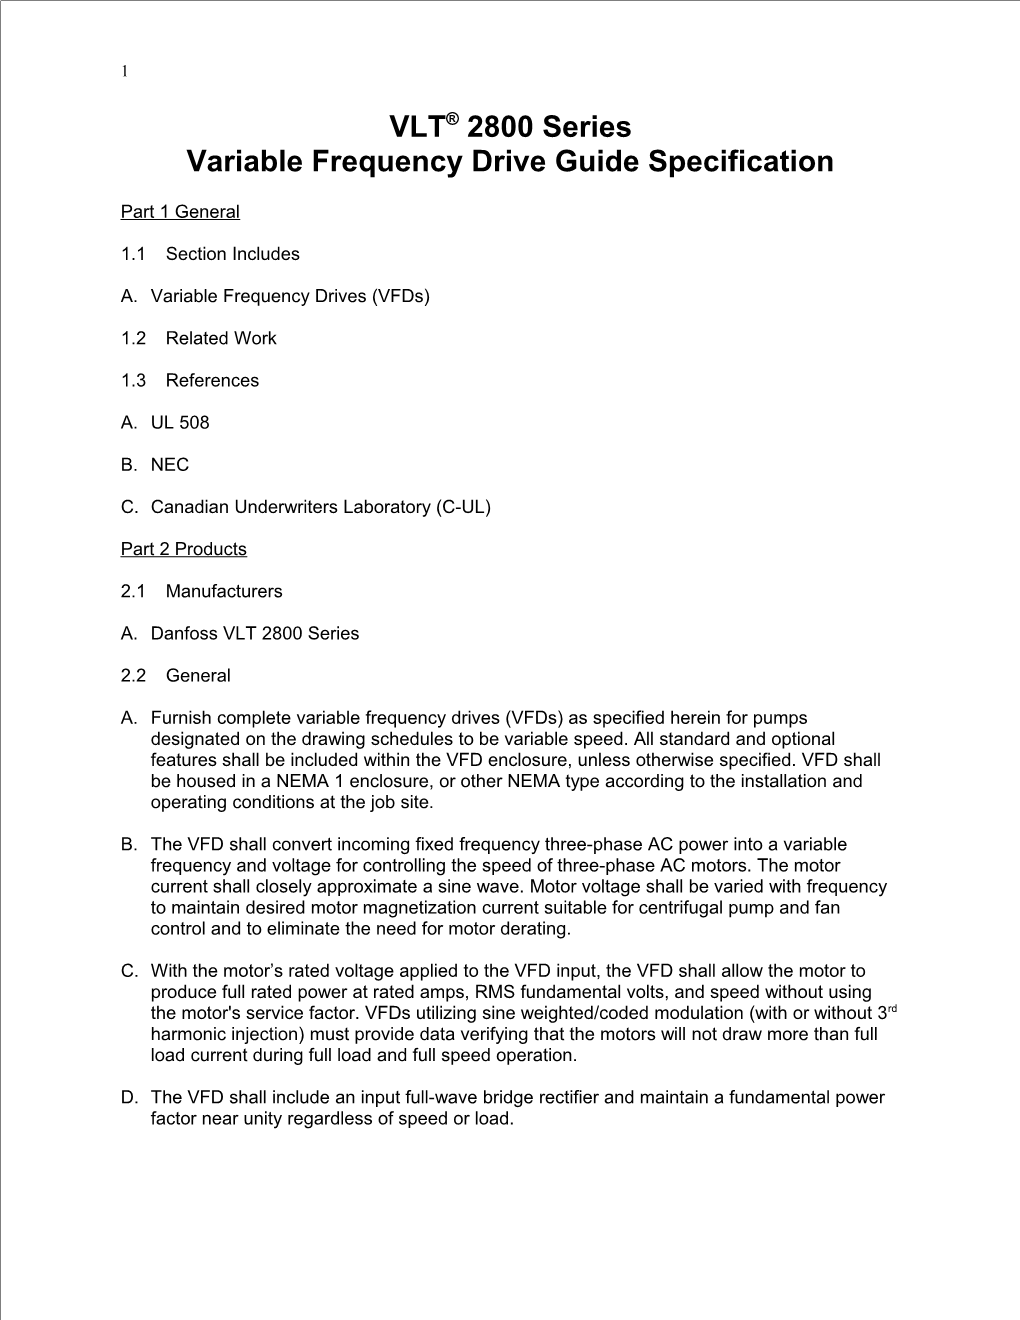 Variable Frequency Drive Guide Specification